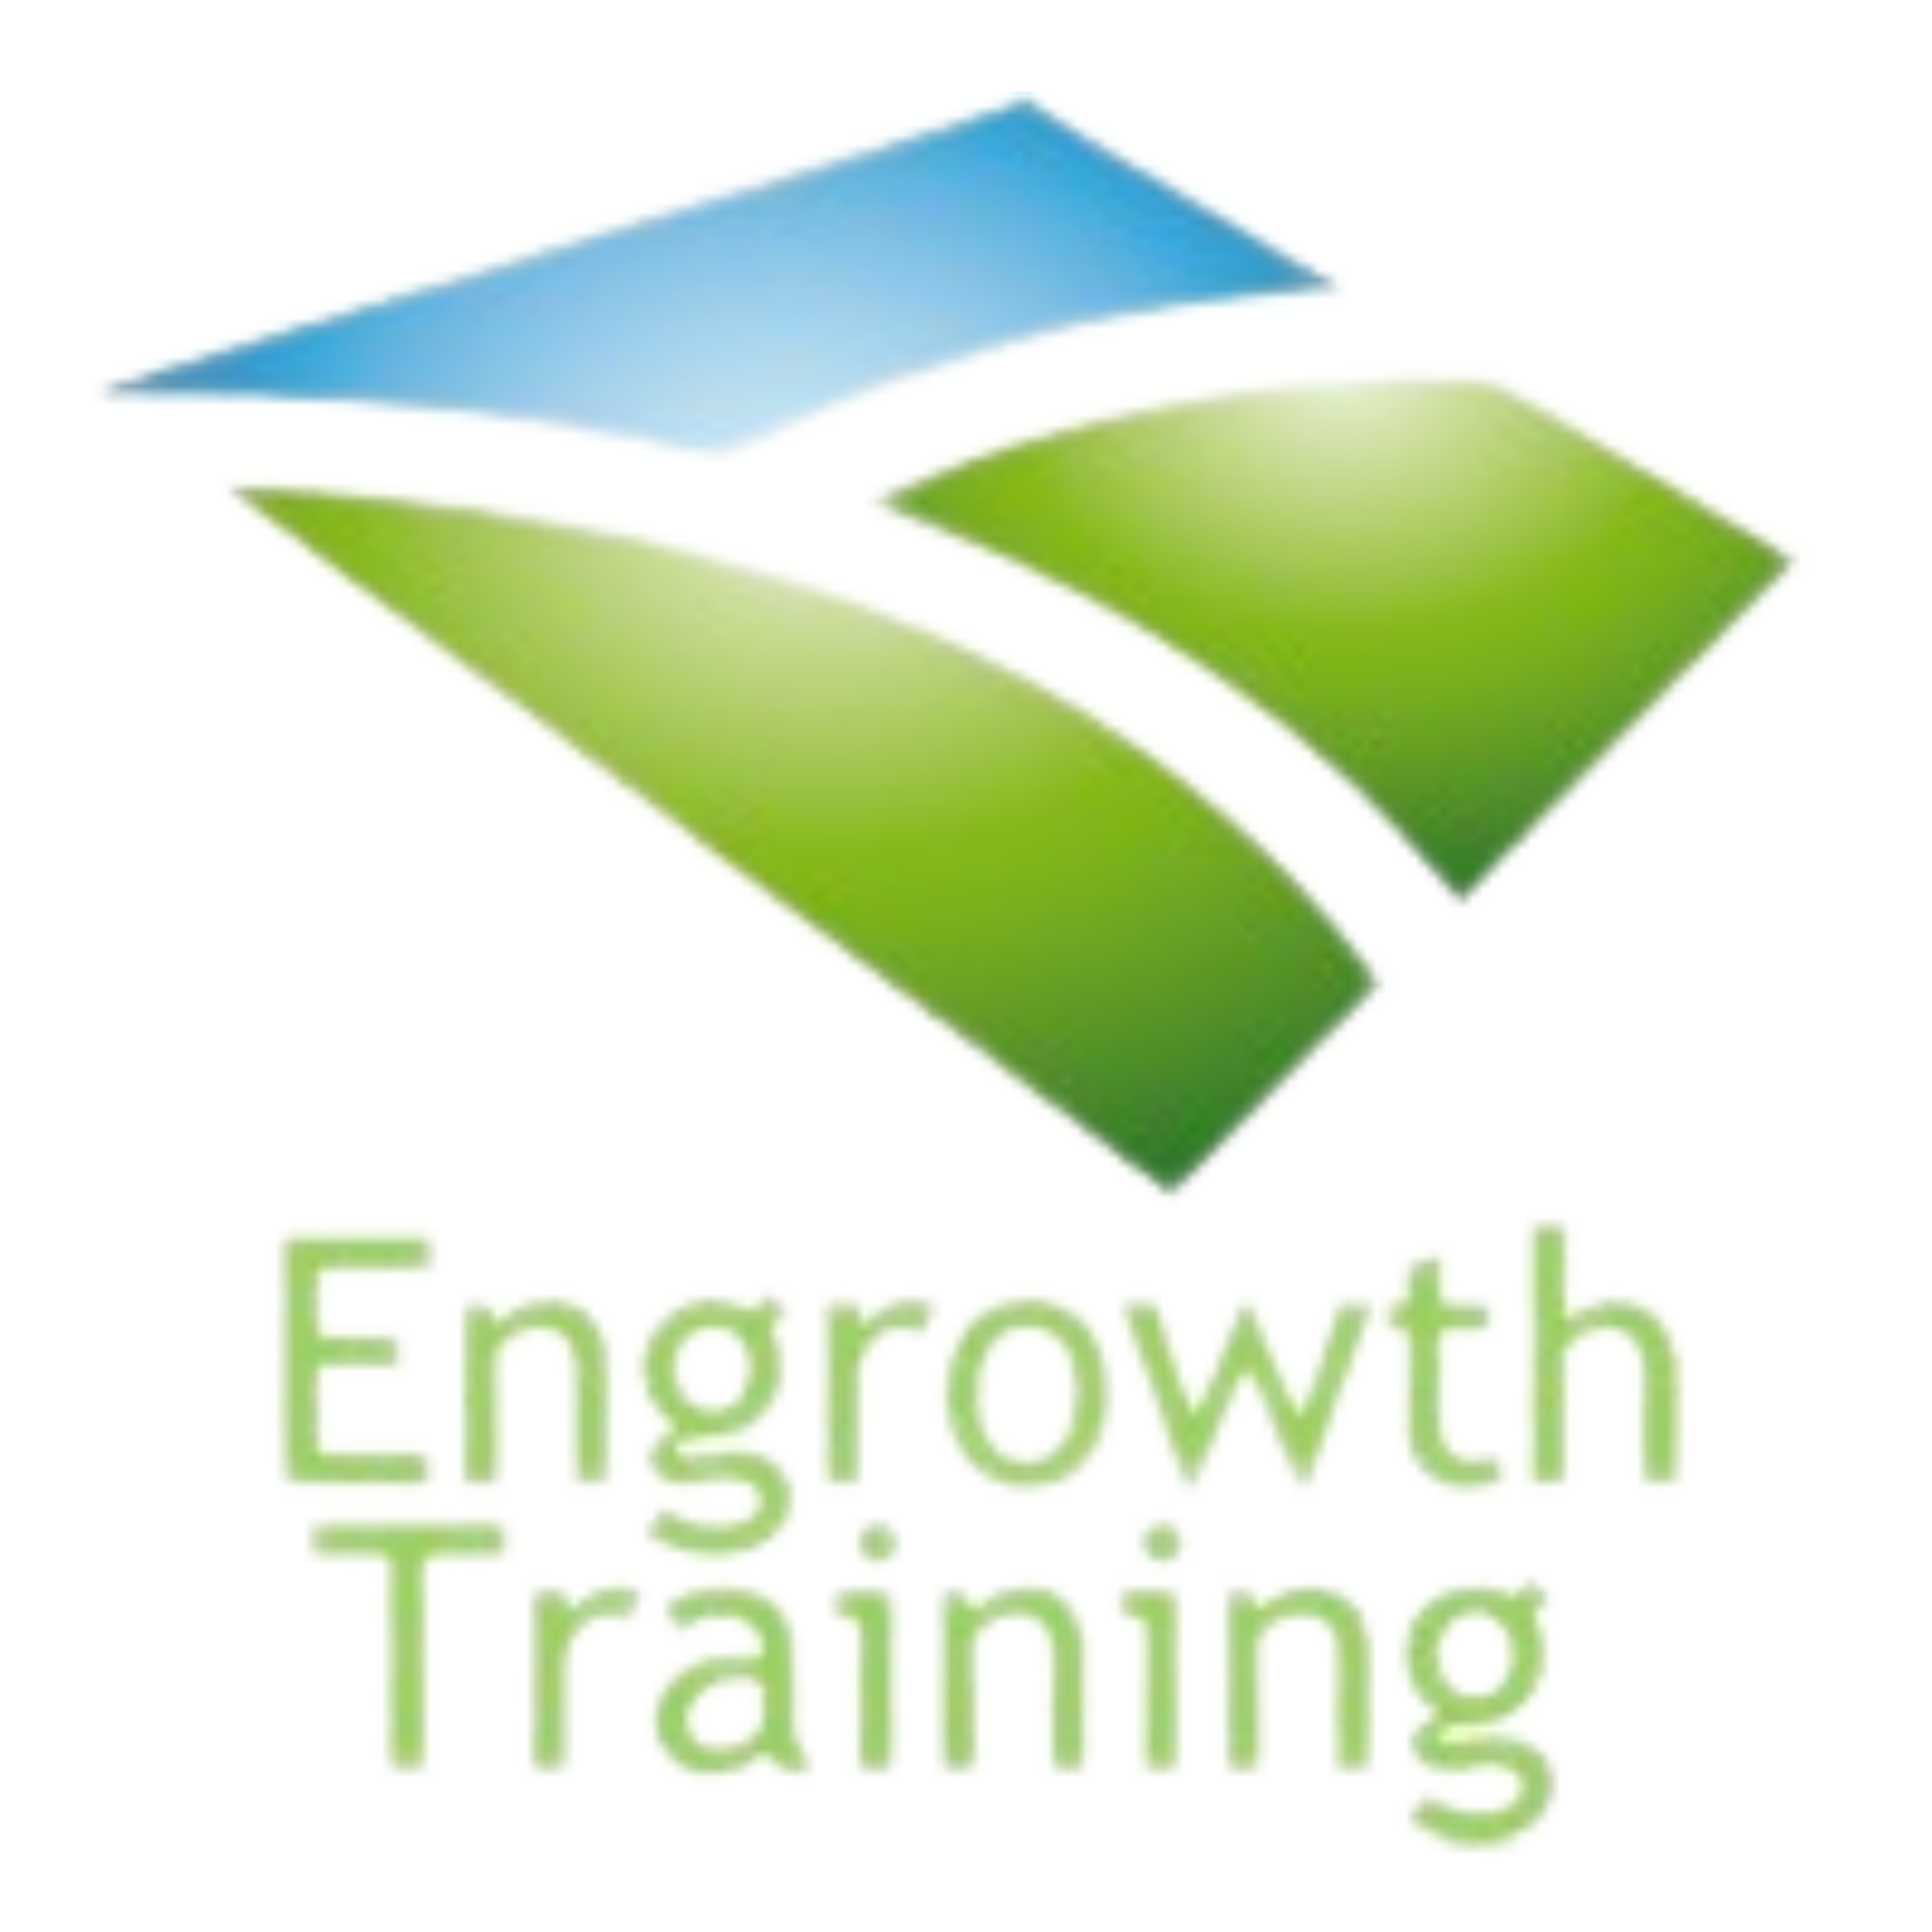 The logo of Engrowth Training